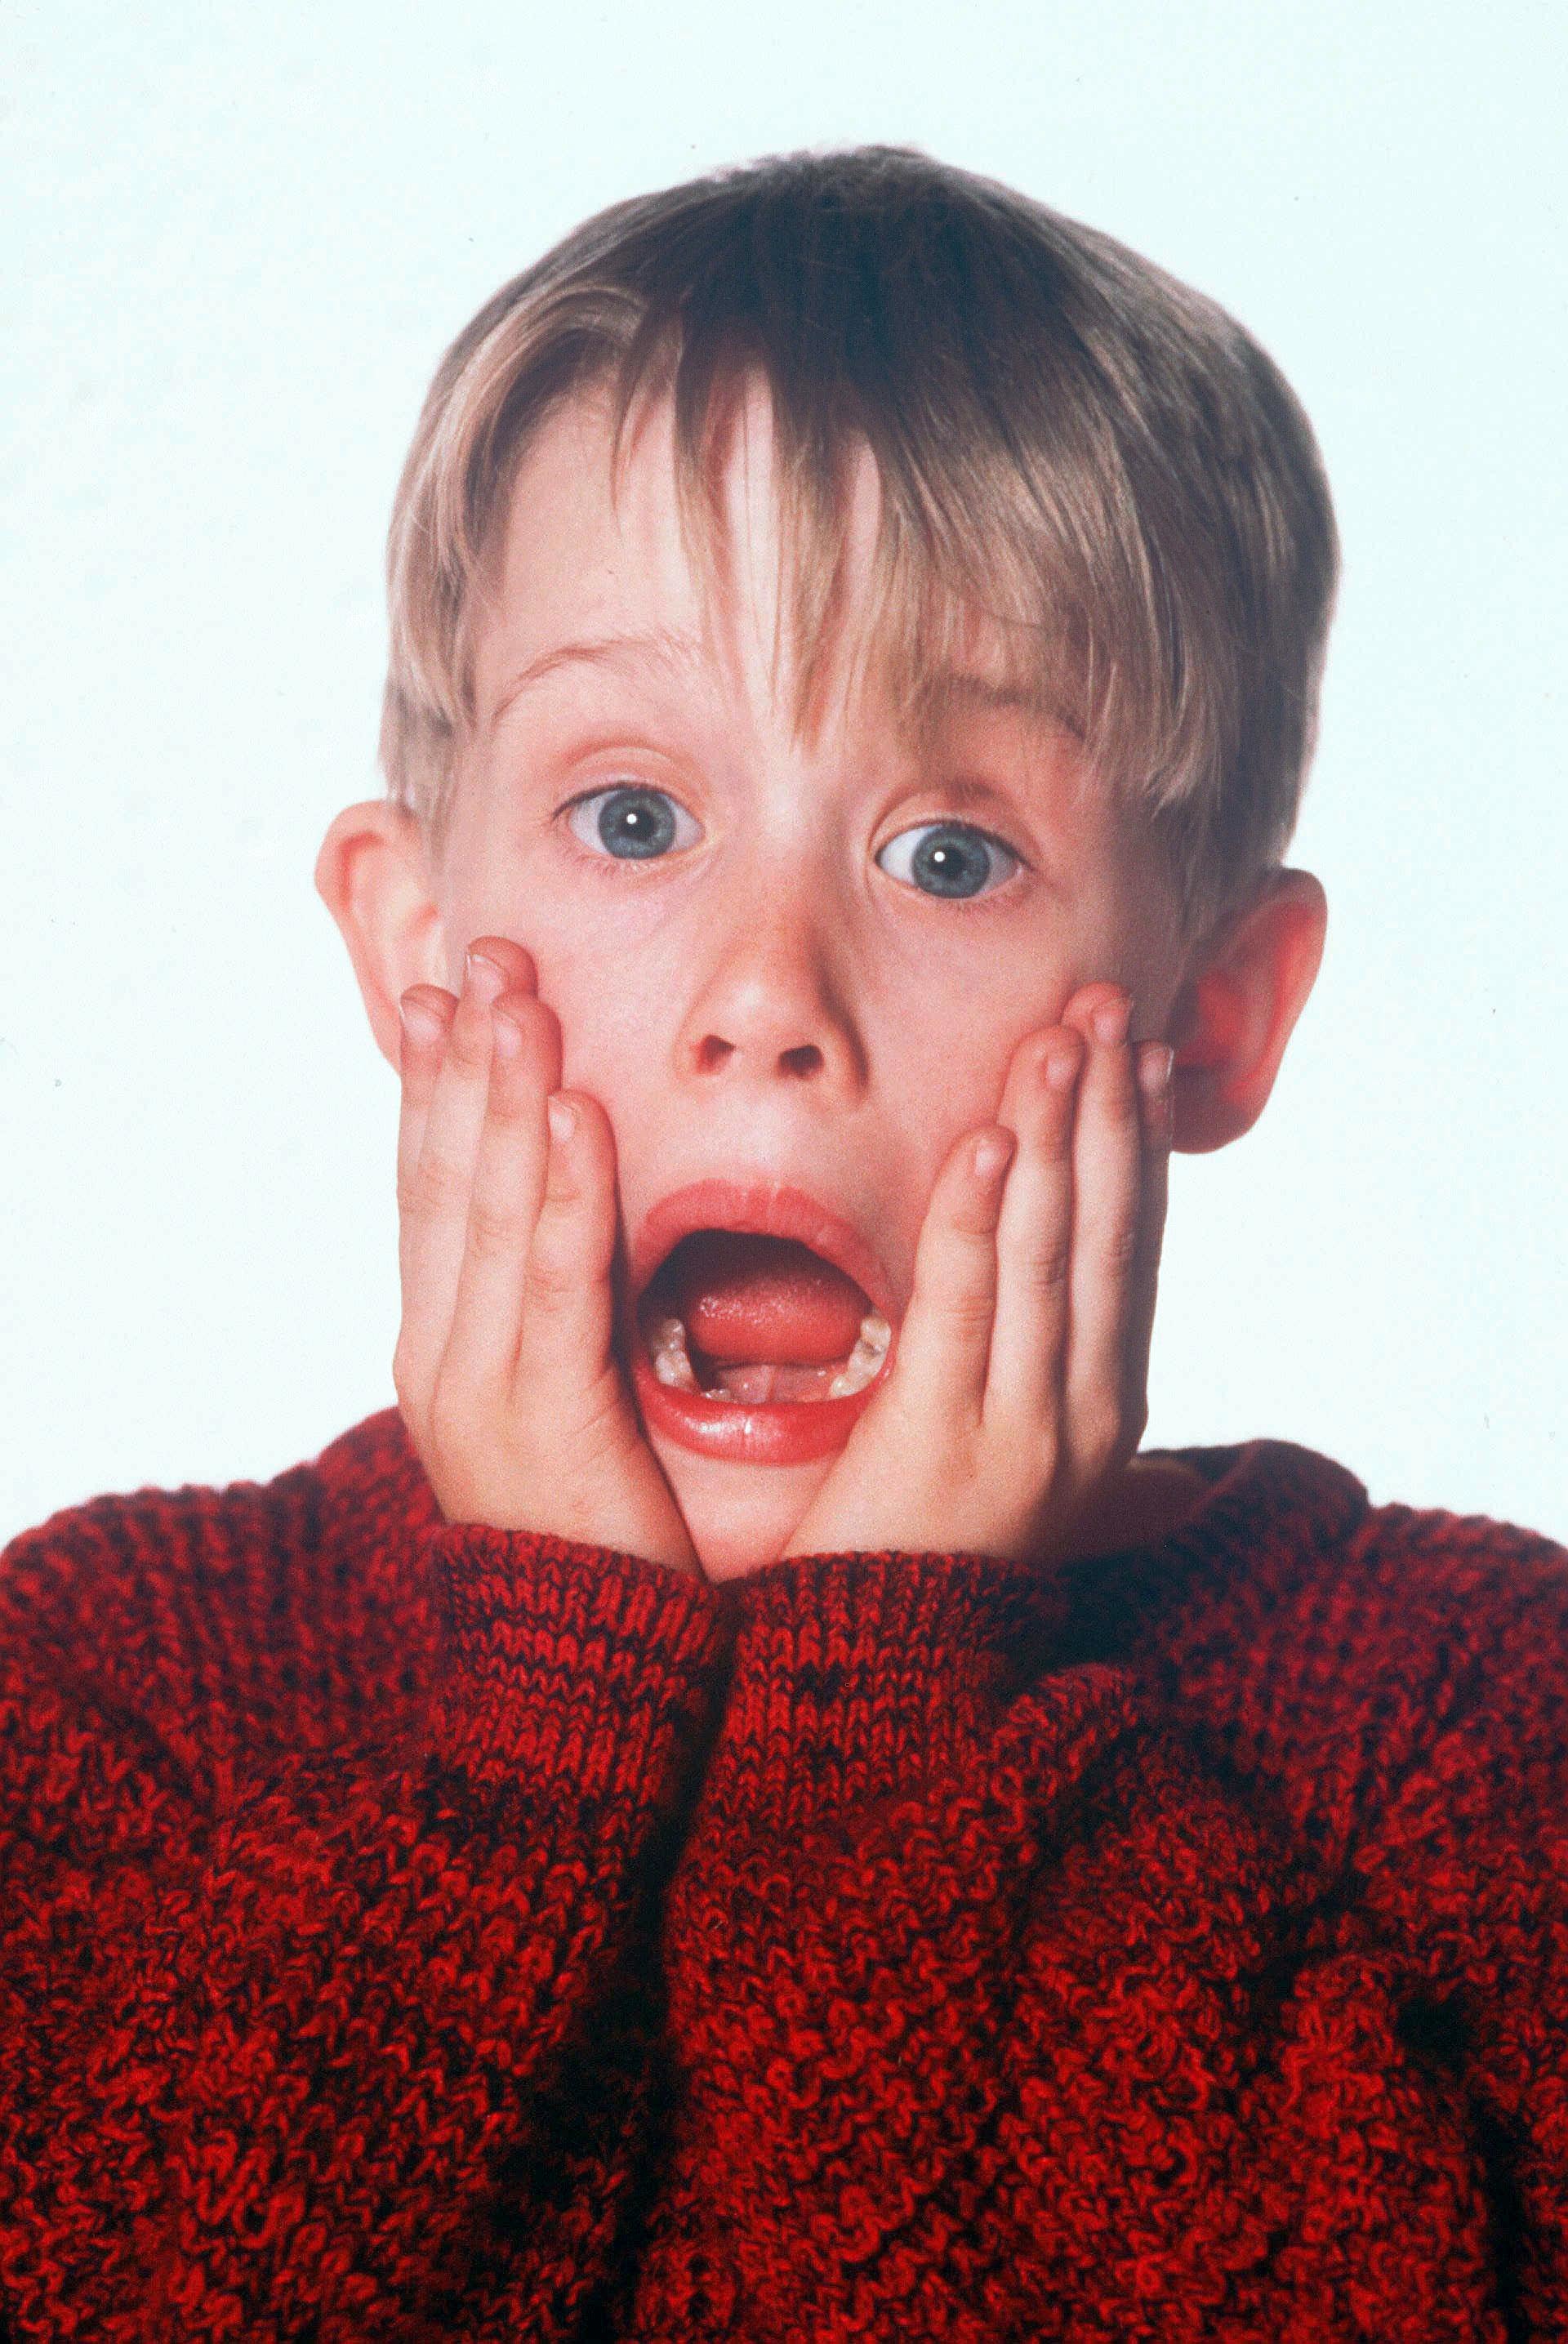 <p>Macaulay Culkin is the quintessential American child star, rising to international fame as Kevin McCallister in "Home Alone" and sequel "Home Alone 2: Lost in New York" in the '90s. He's also known for his roles in "Uncle Buck," "My Girl" and "Richie Rich." Around the time of "Home Alone," he also struck up a friendship with Michael Jackson, making an appearance in Michael's "Black or White" music video. </p>